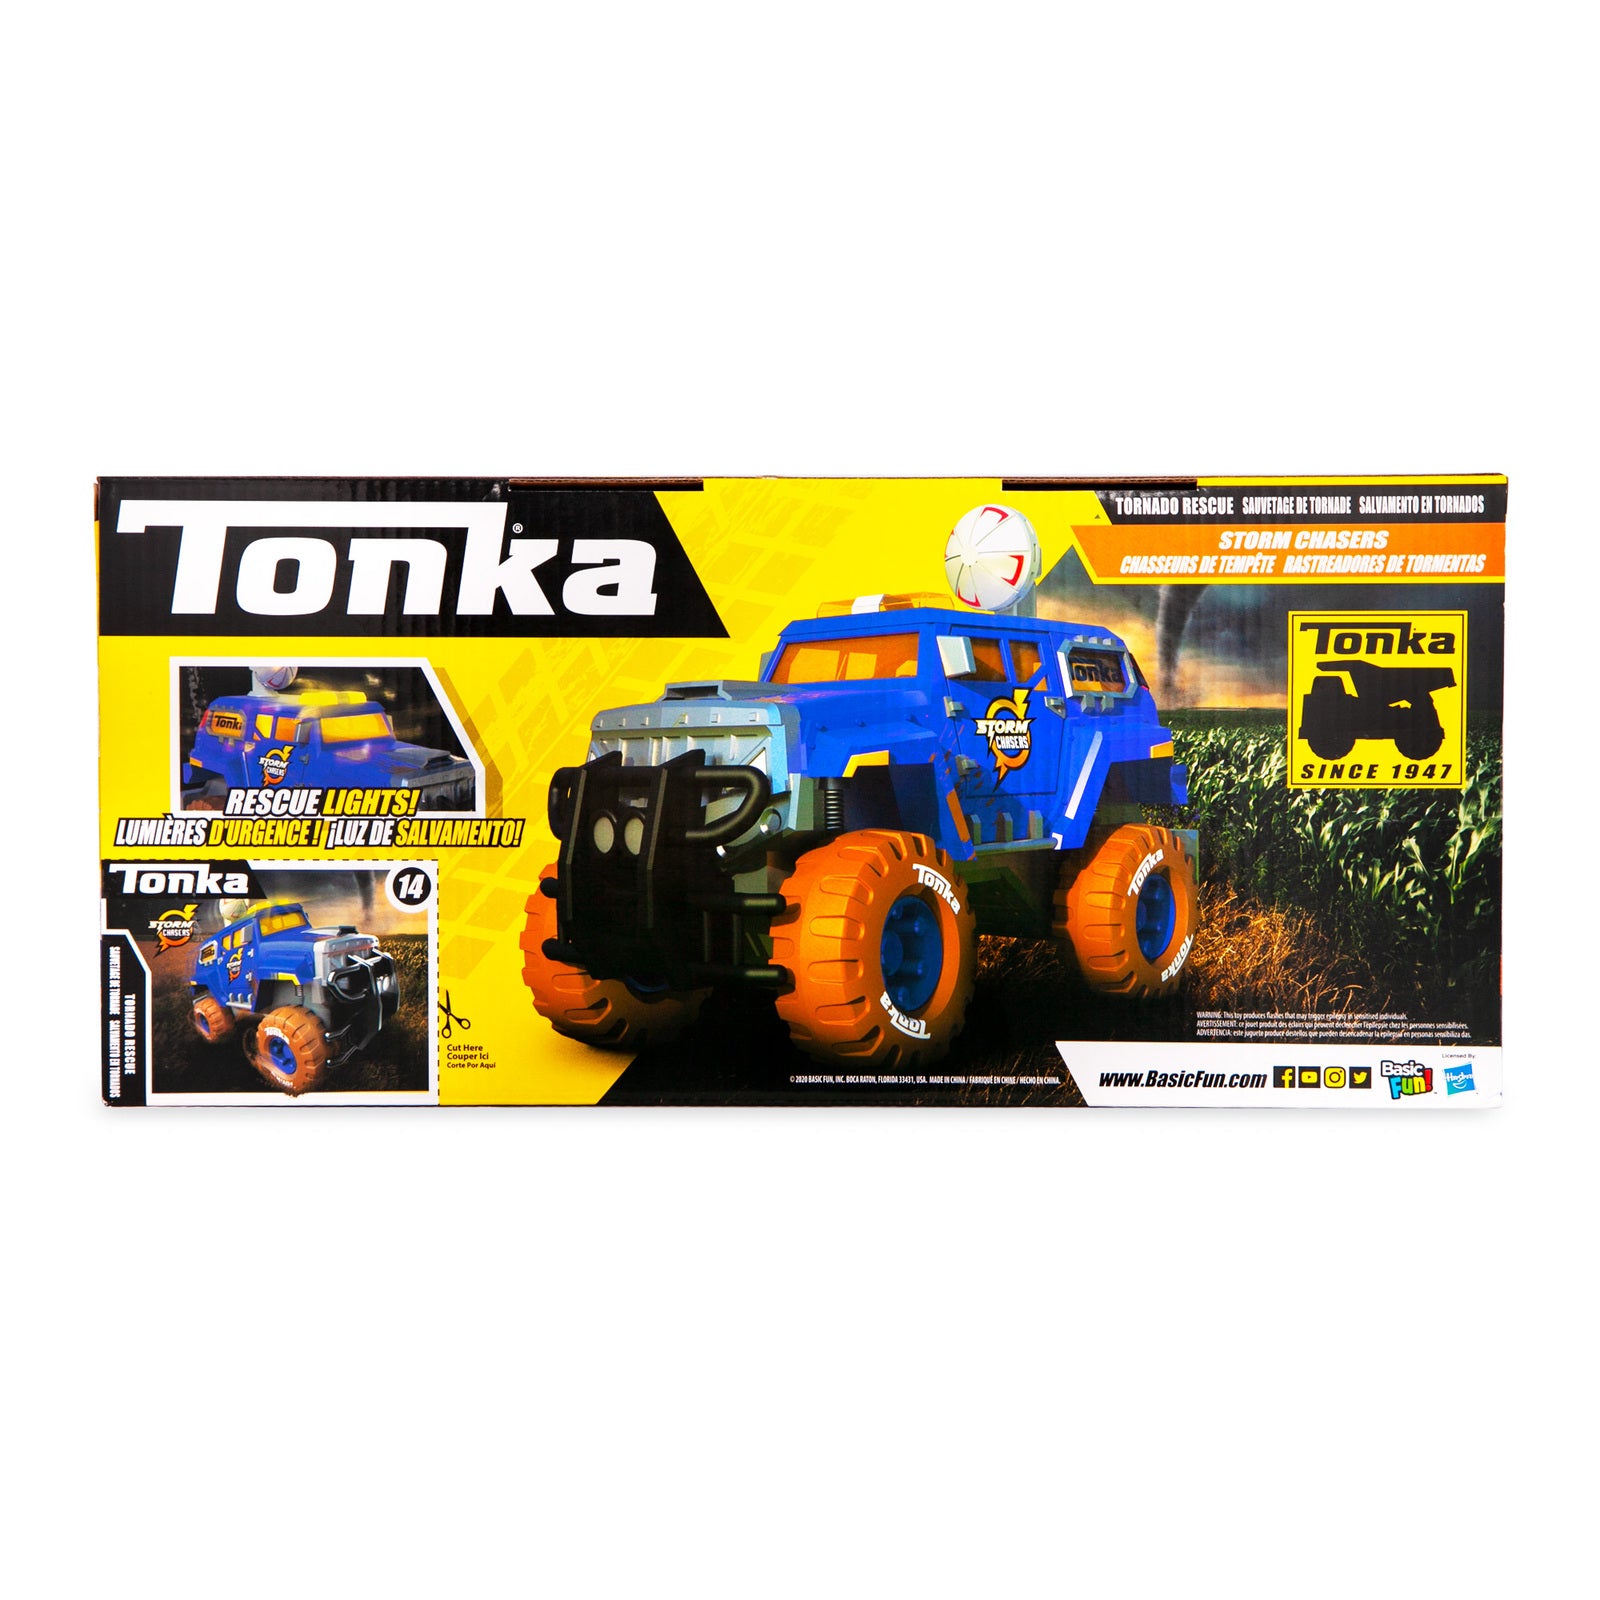 Tonka Storm Chasers - Tornado Rescue